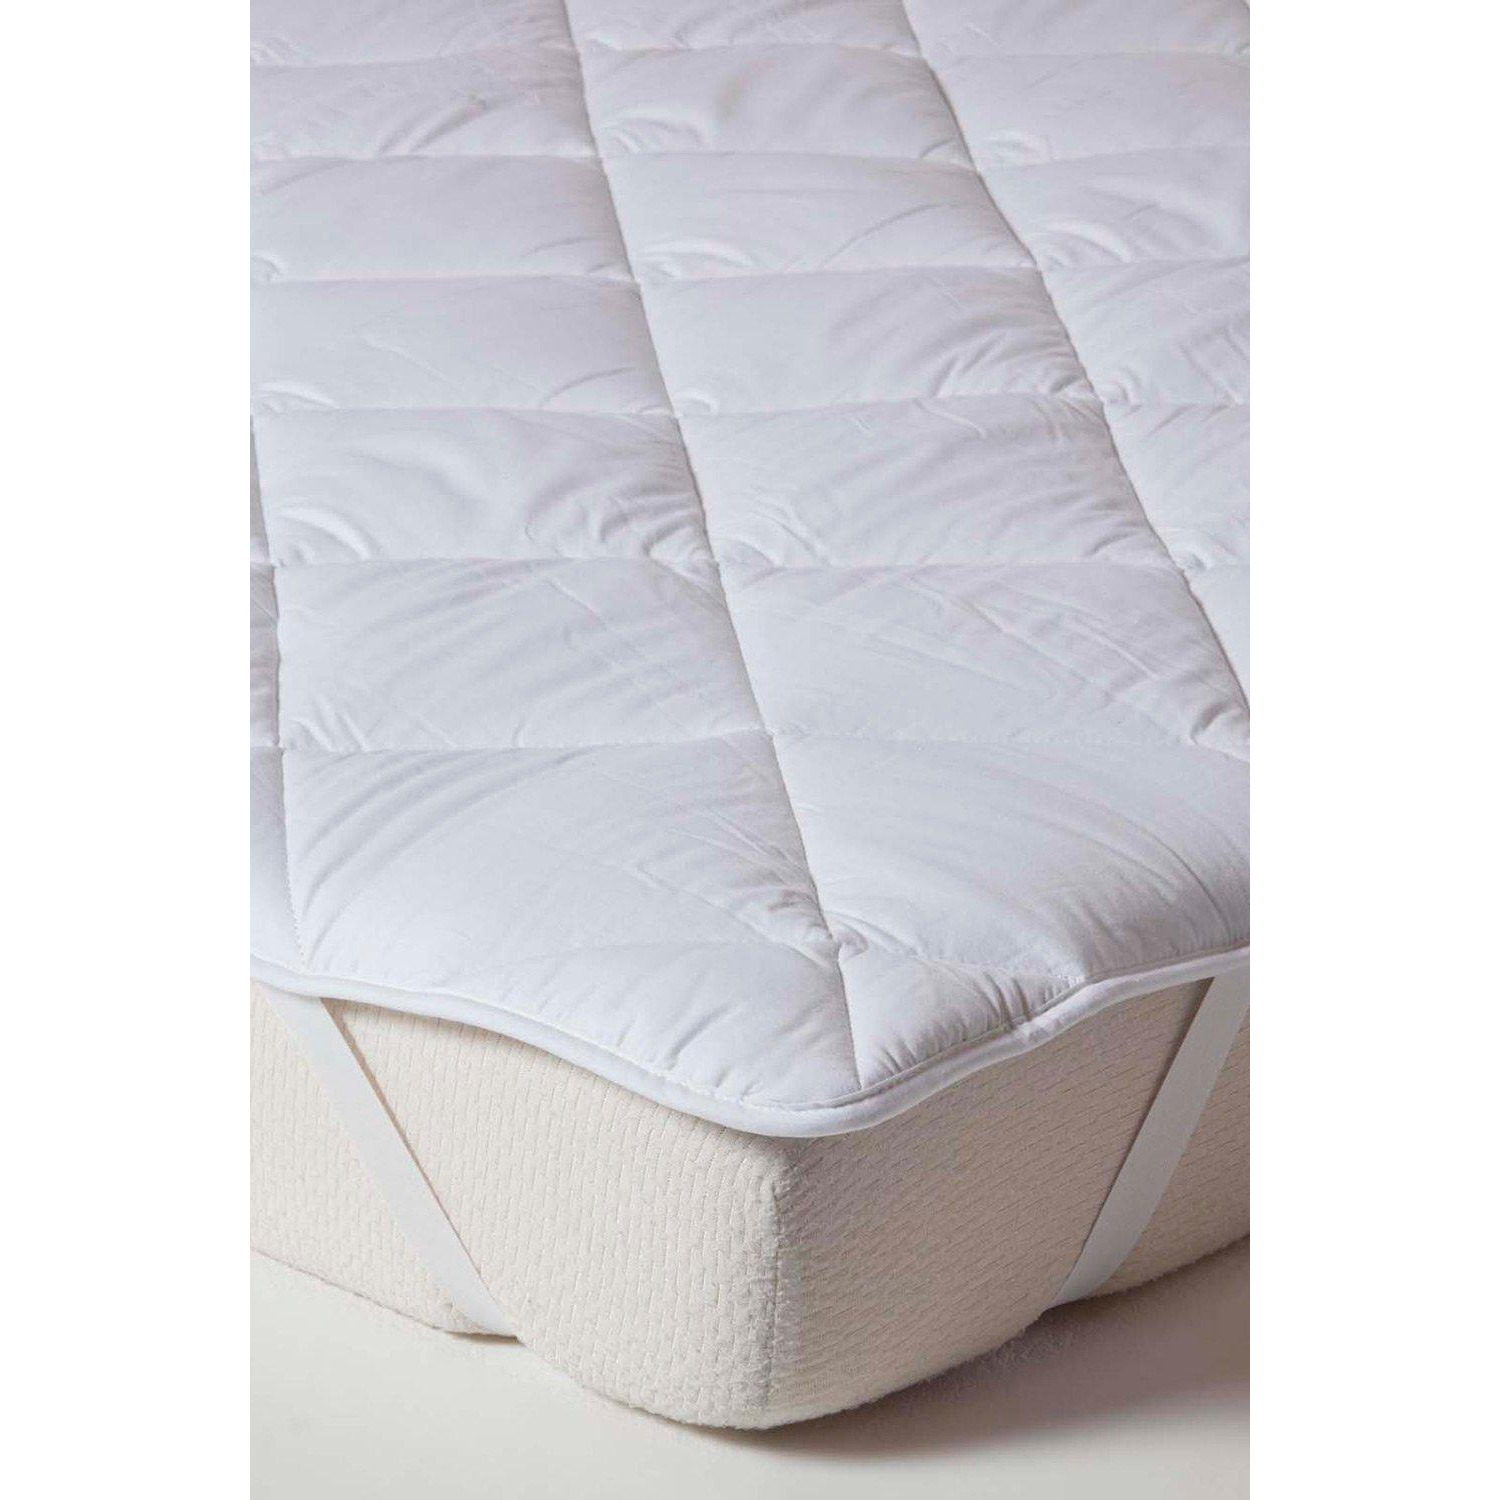 Luxury Extra Thick 500 GSM Cotton Mattress Topper - image 1